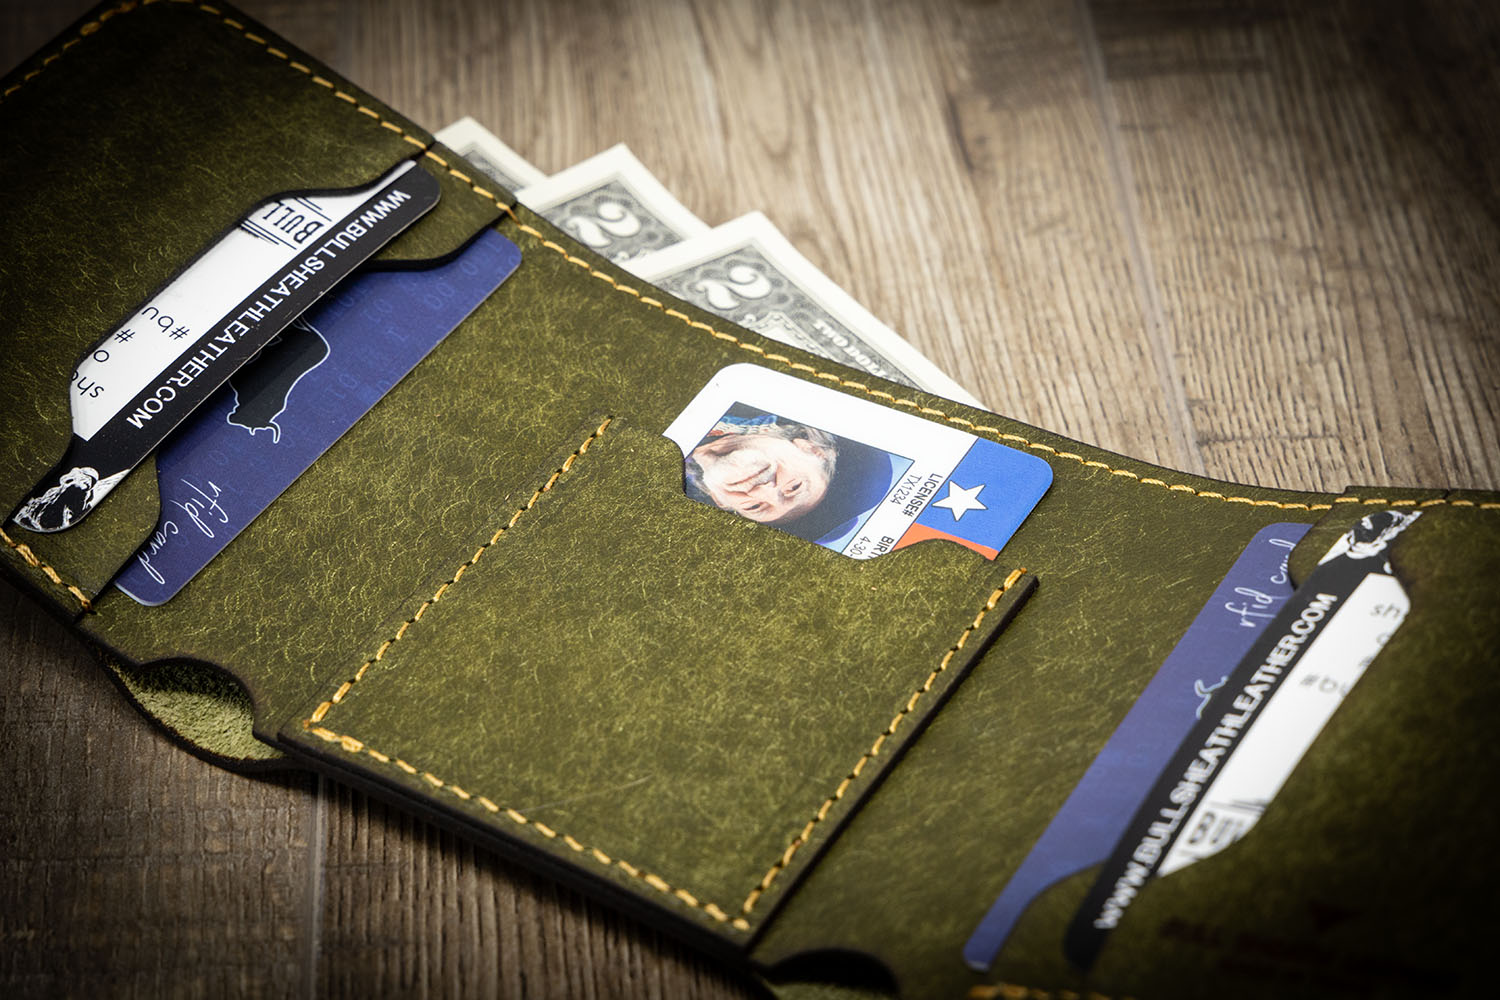 A picture of a trifold ID wallet showcasing its multiple compartments, clear ID window, and compact size - all essential features for everyday use.